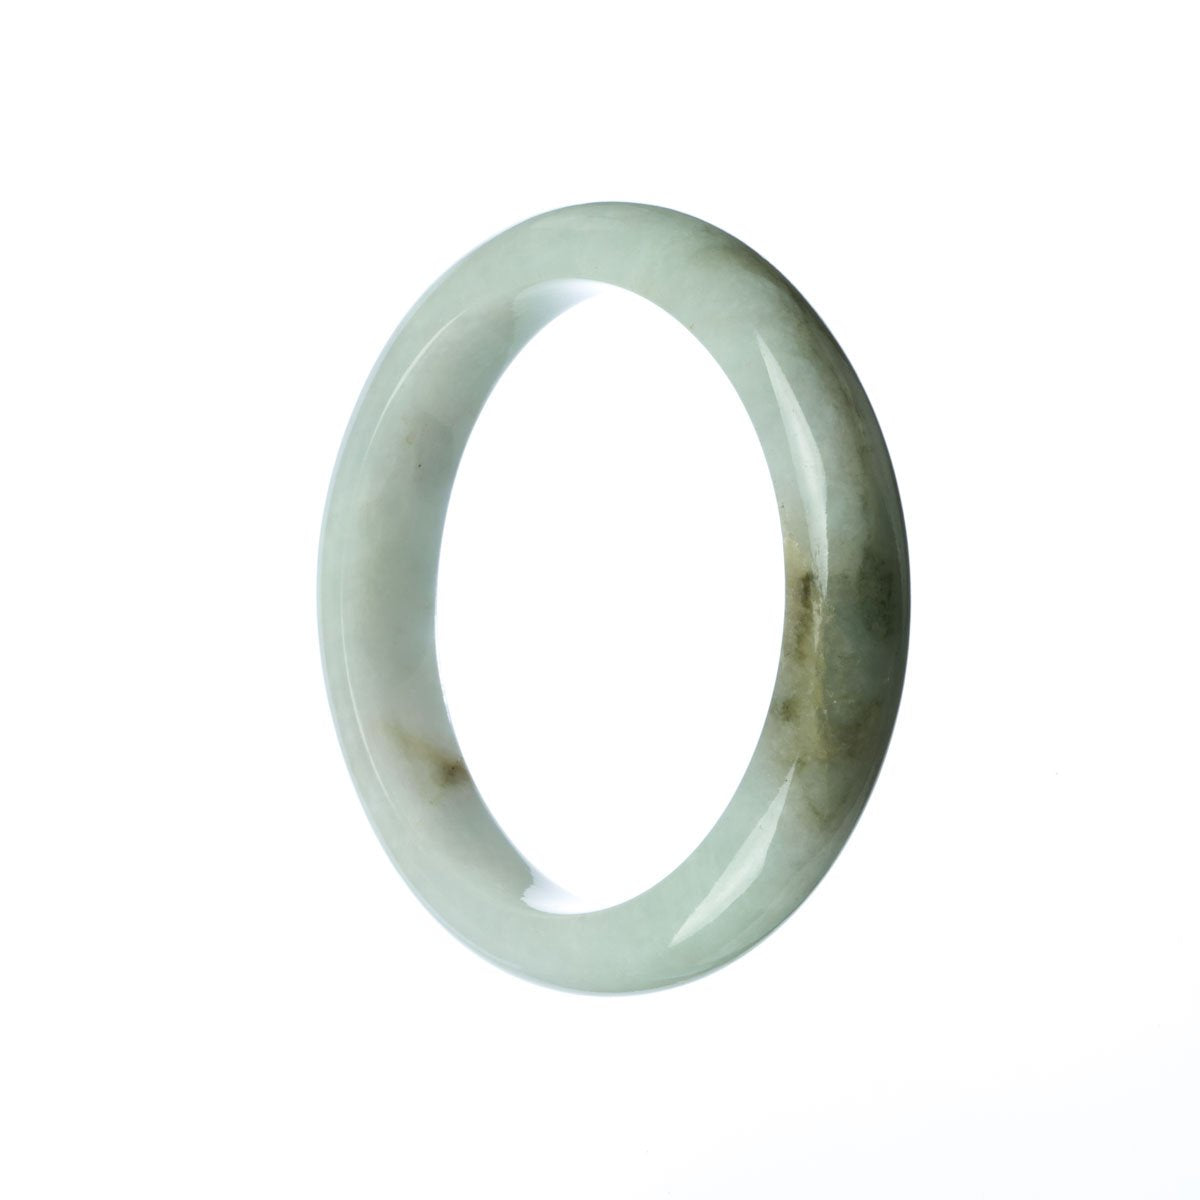 A white and green jade bracelet, with a half-moon shape, measuring 55mm in size. The bracelet is made of high-quality authentic grade A jade, and it is sold by MAYS.